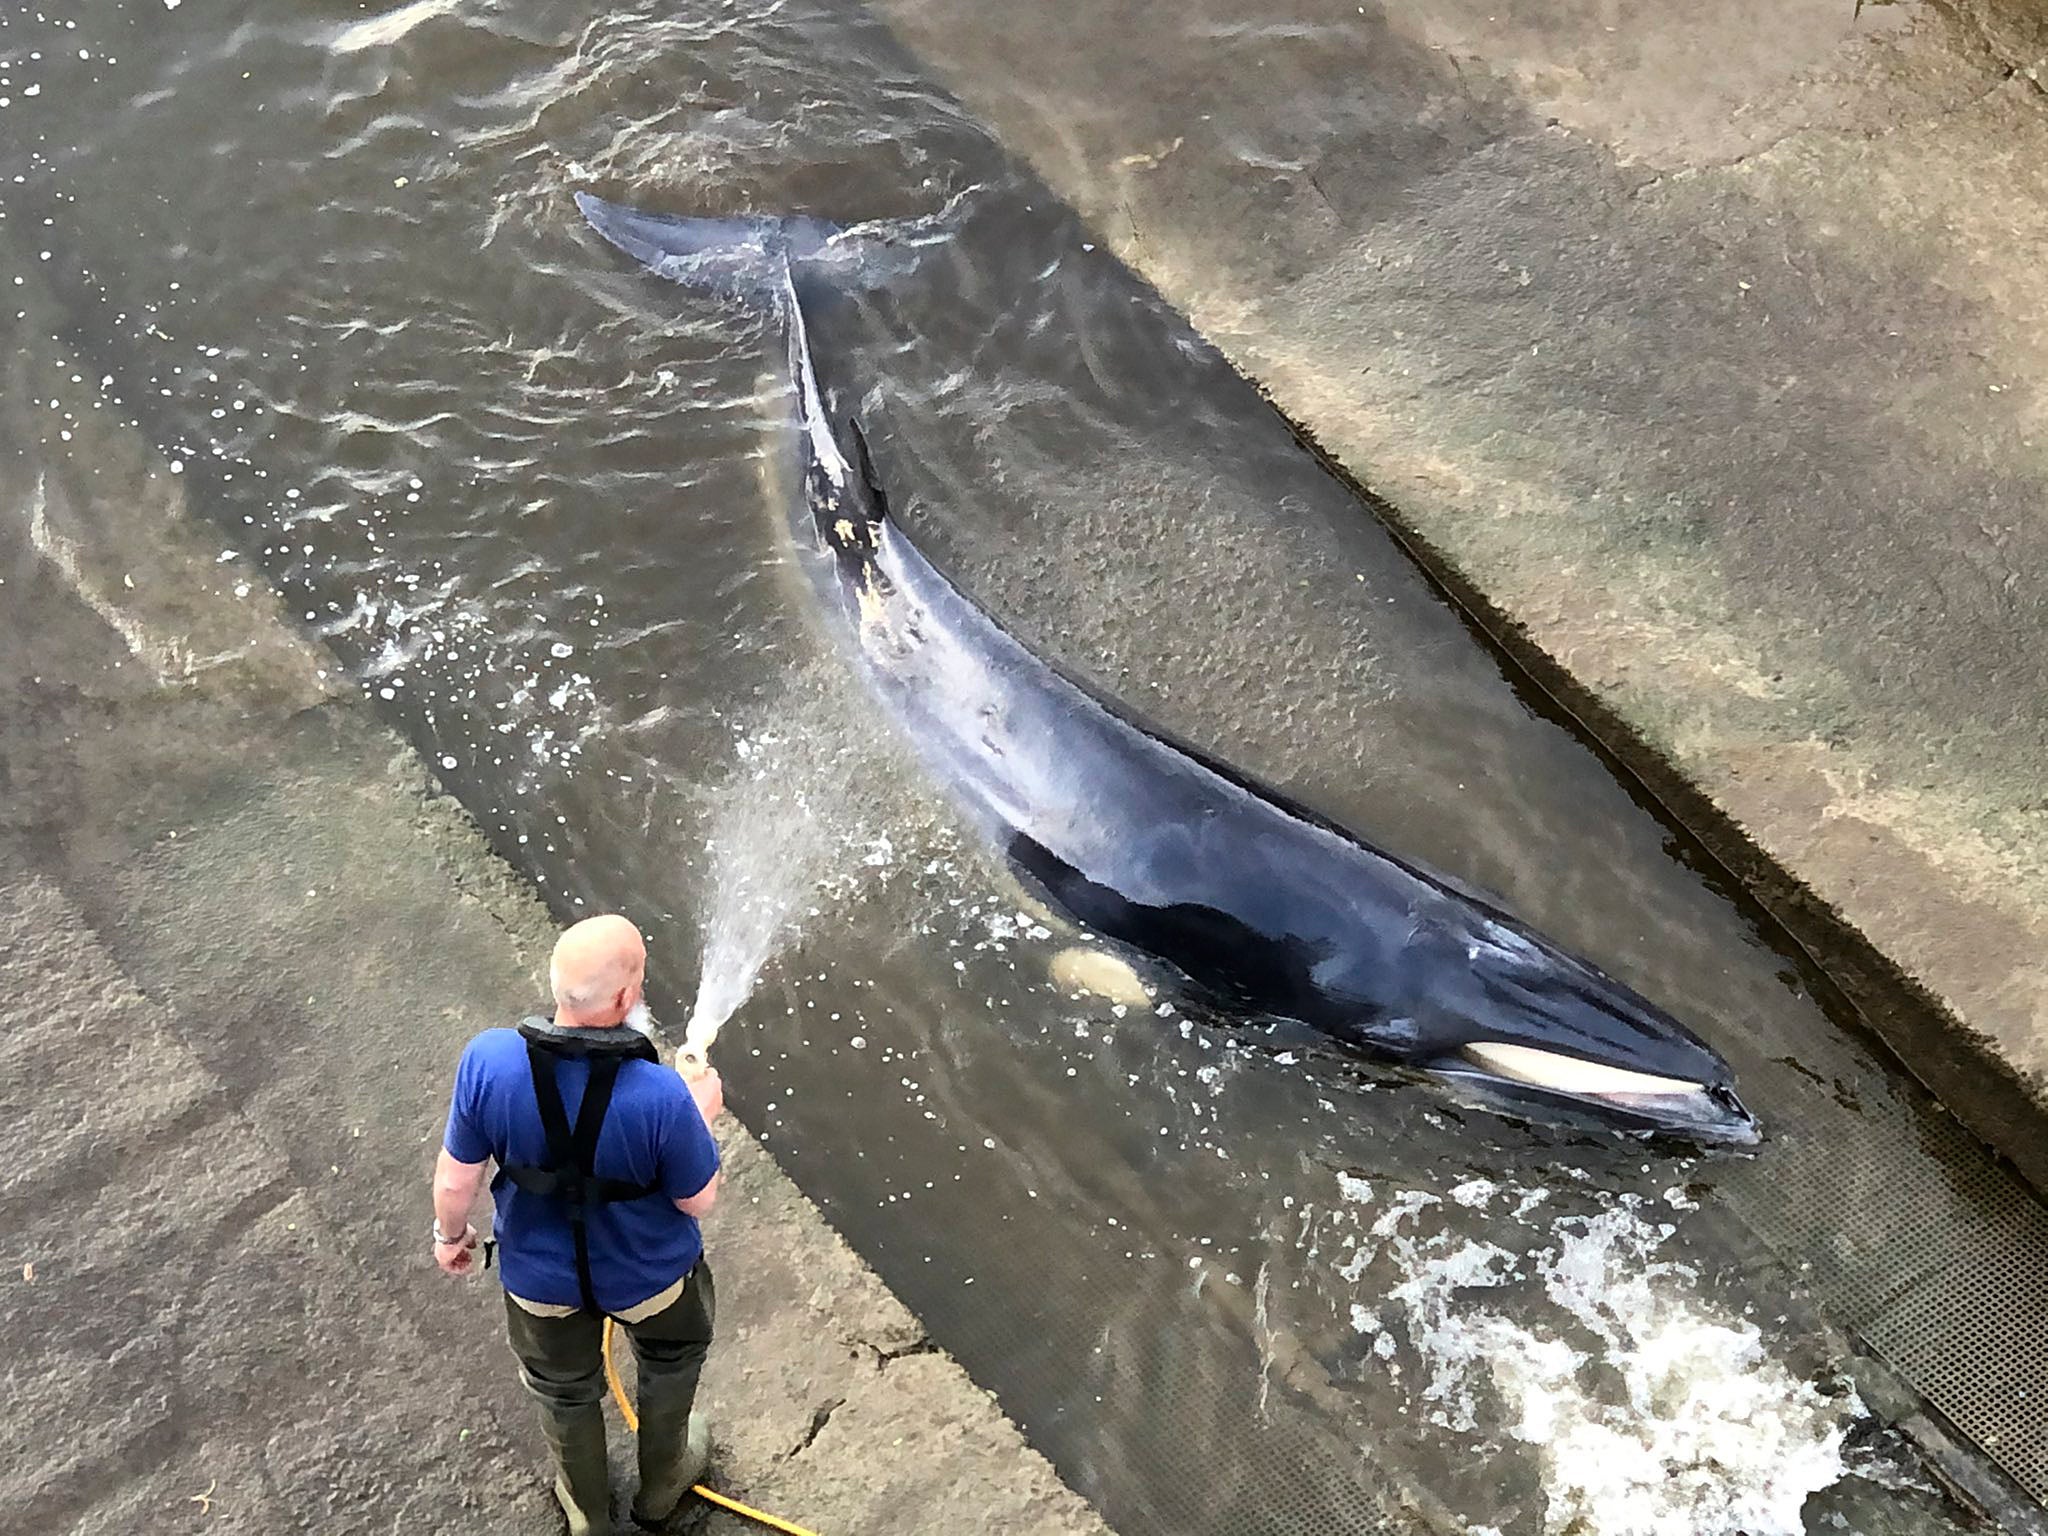 A man hoses down the whale that was stuck at Richmond Lock